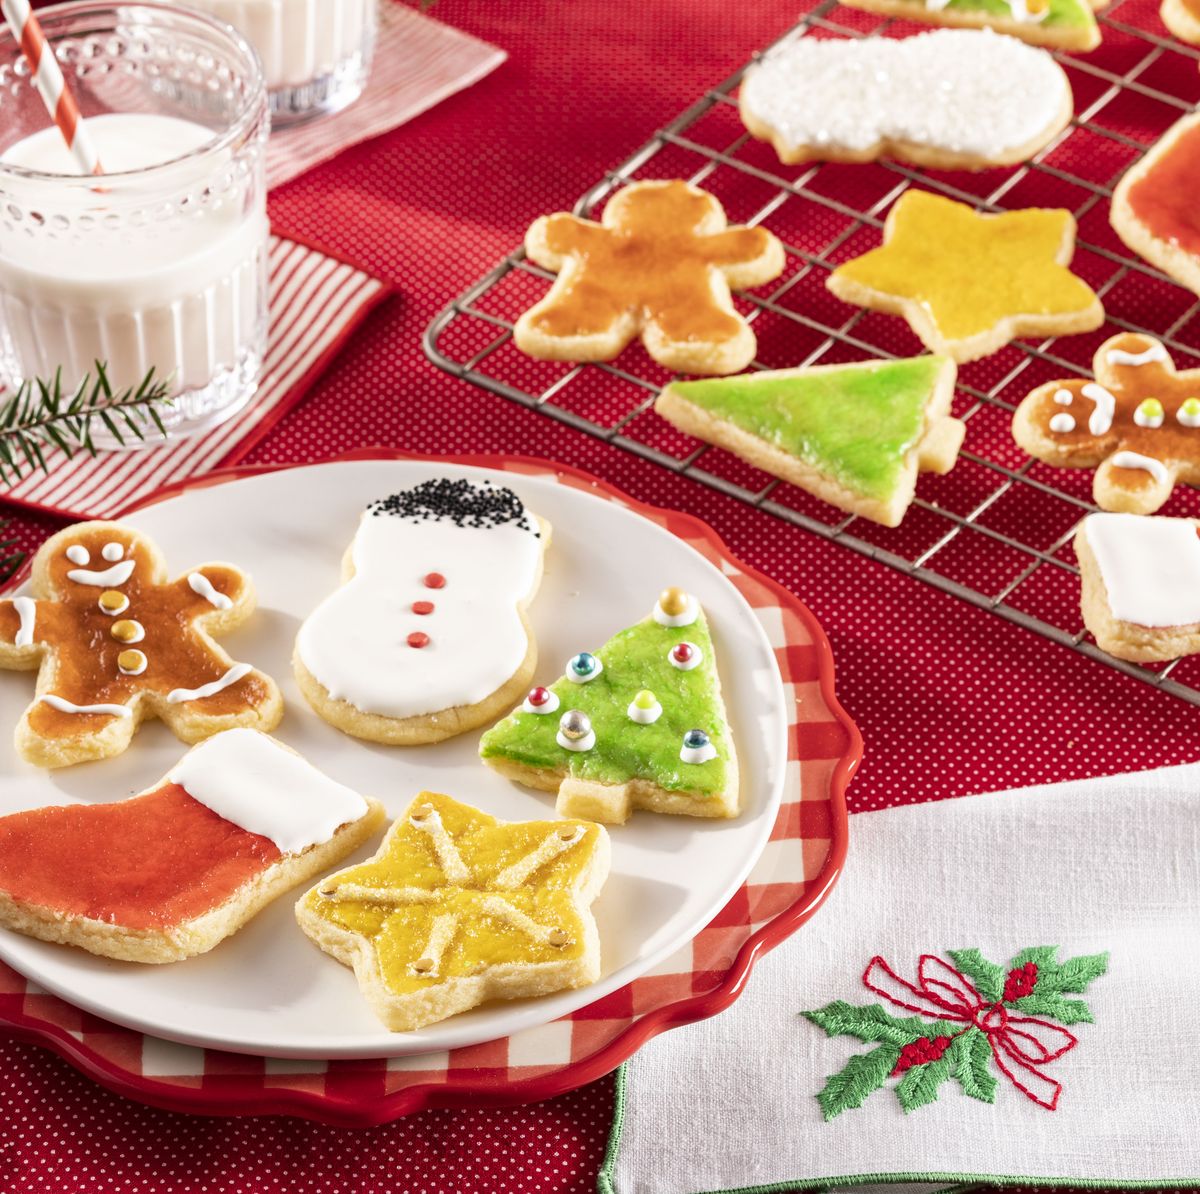 https://hips.hearstapps.com/hmg-prod/images/my-favorite-christmas-cookie-recipe-1636733916.jpg?crop=0.670xw:1.00xh;0.0481xw,0&resize=1200:*